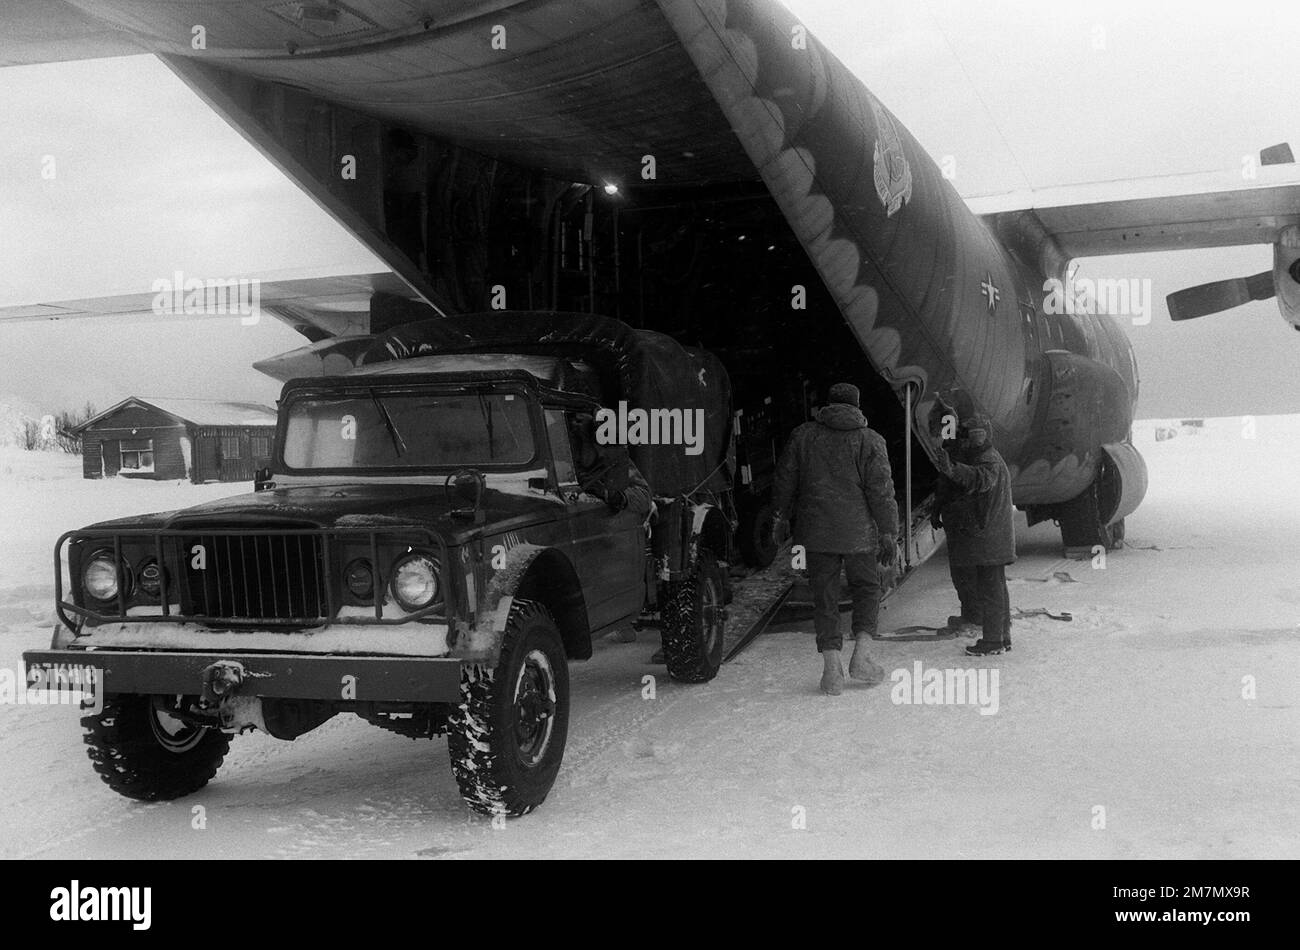 Bodo air base Black and White Stock Photos & Images - Alamy